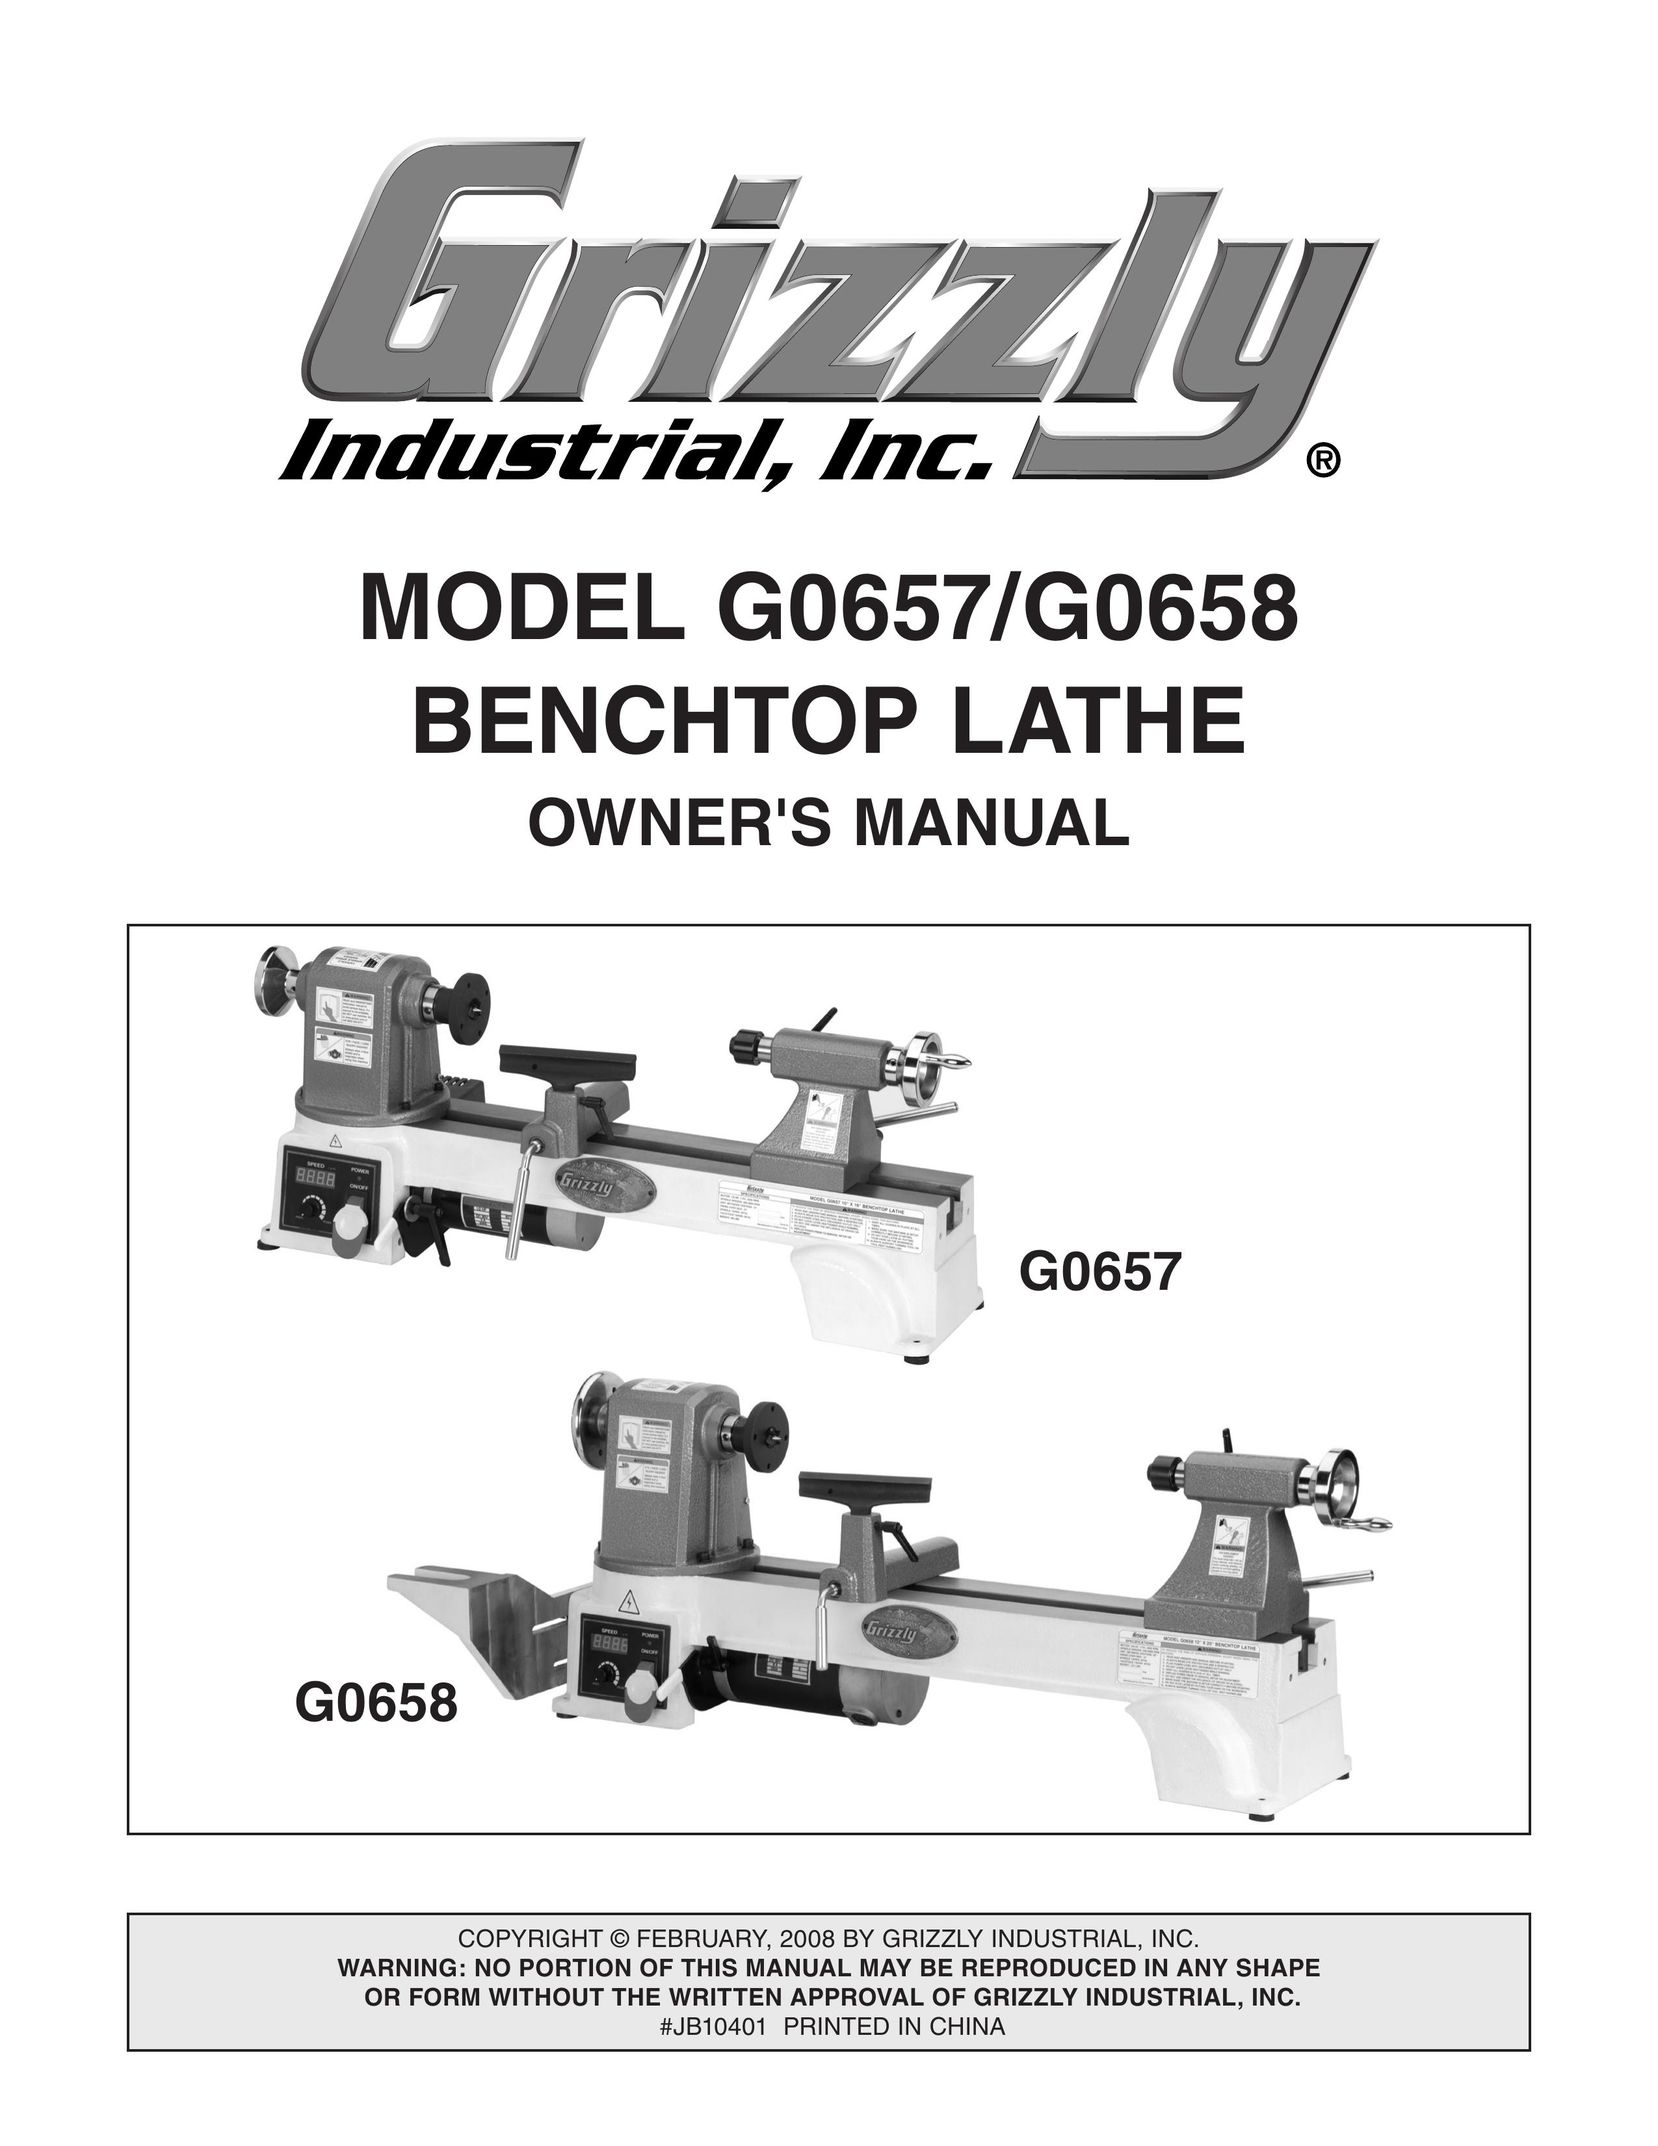 Grizzly G0658 Lathe User Manual